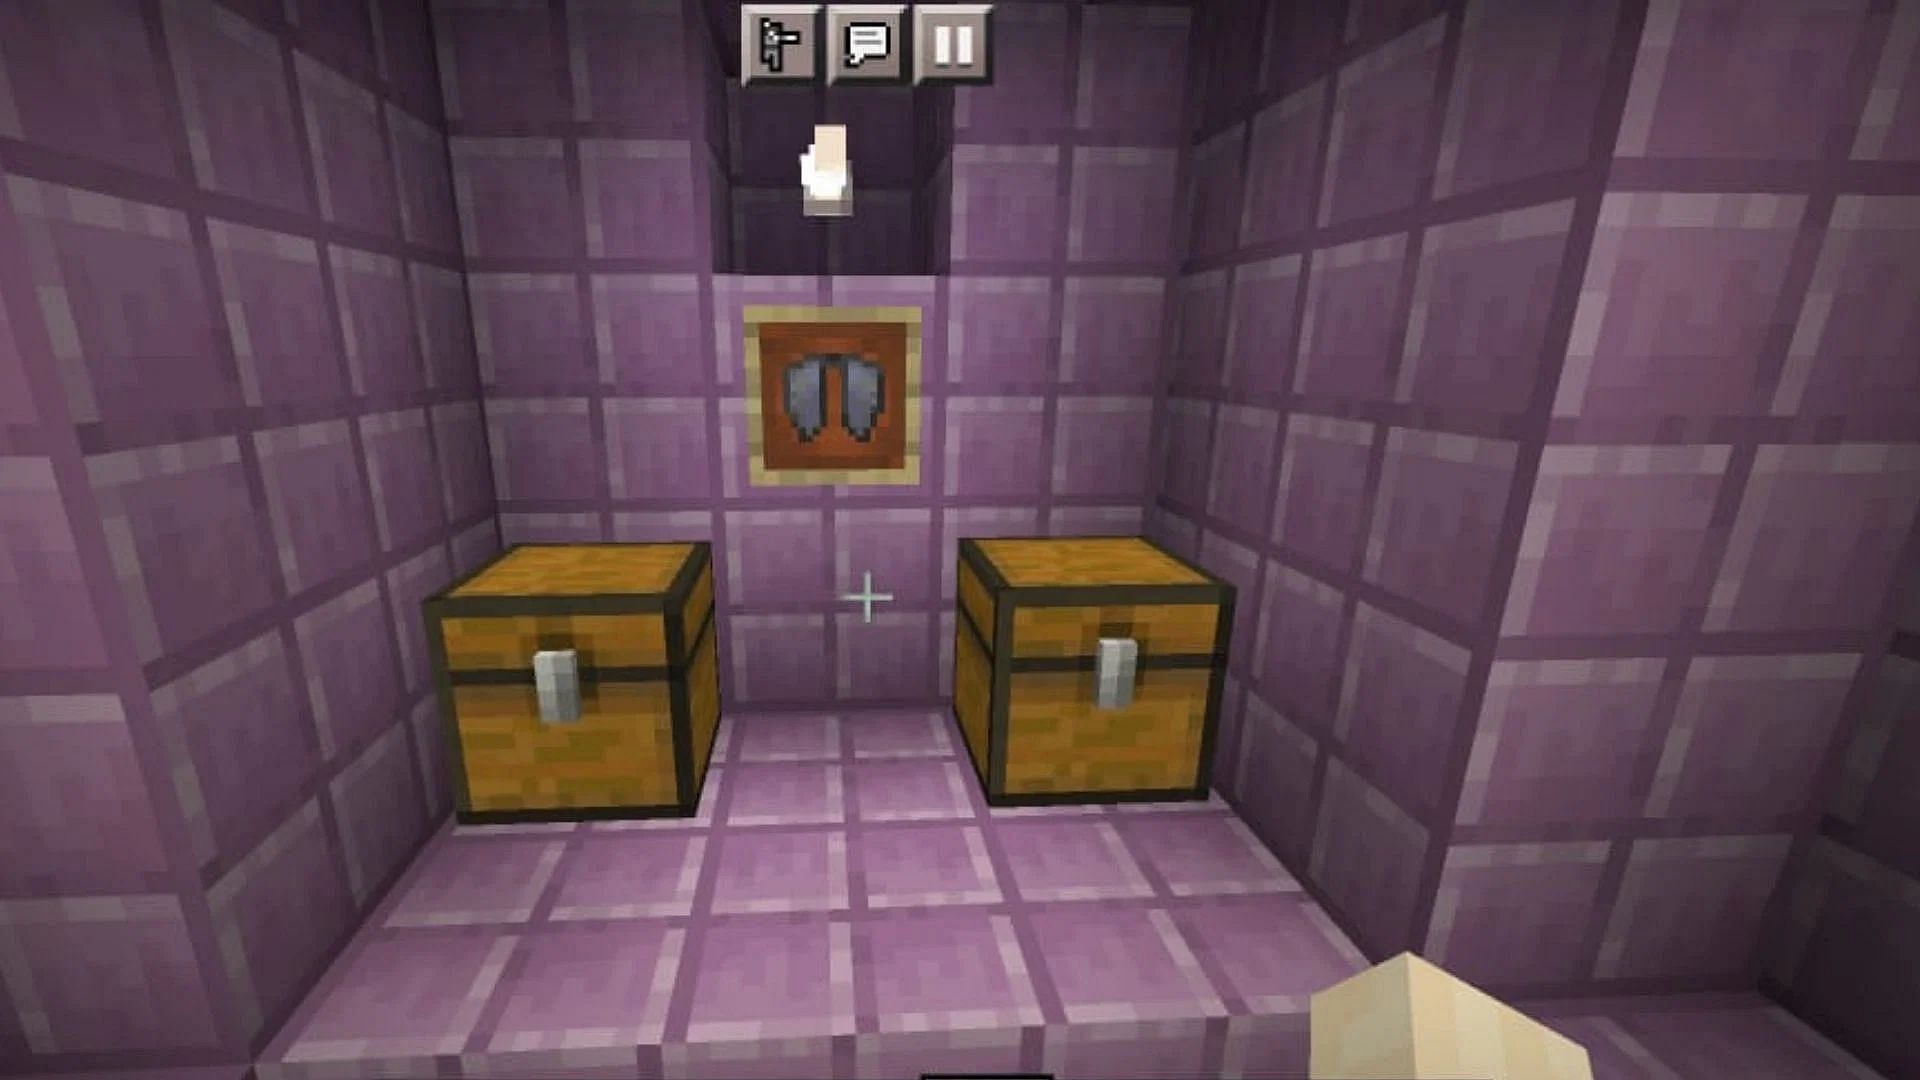 Elytra are quite rare as they are found only on End Ships (Image via Mojang)